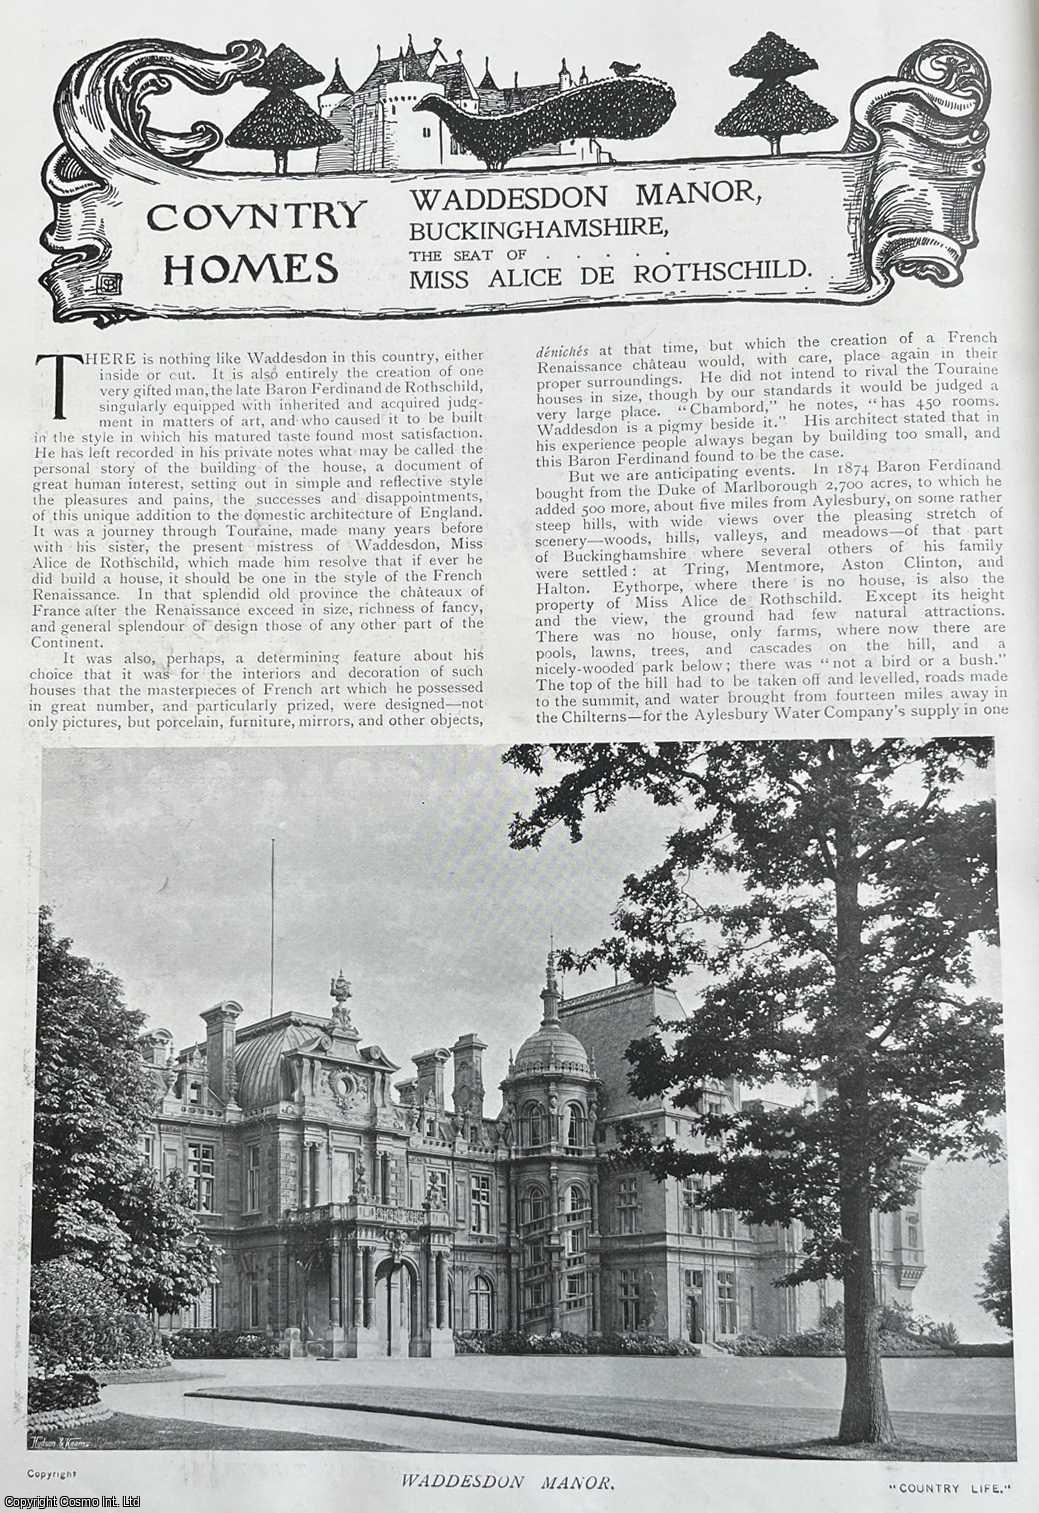 Country Life Magazine - Waddesdon Manor, Buckinghamshire. Several pictures and accompanying text, removed from an original issue of Country Life Magazine, 1902.